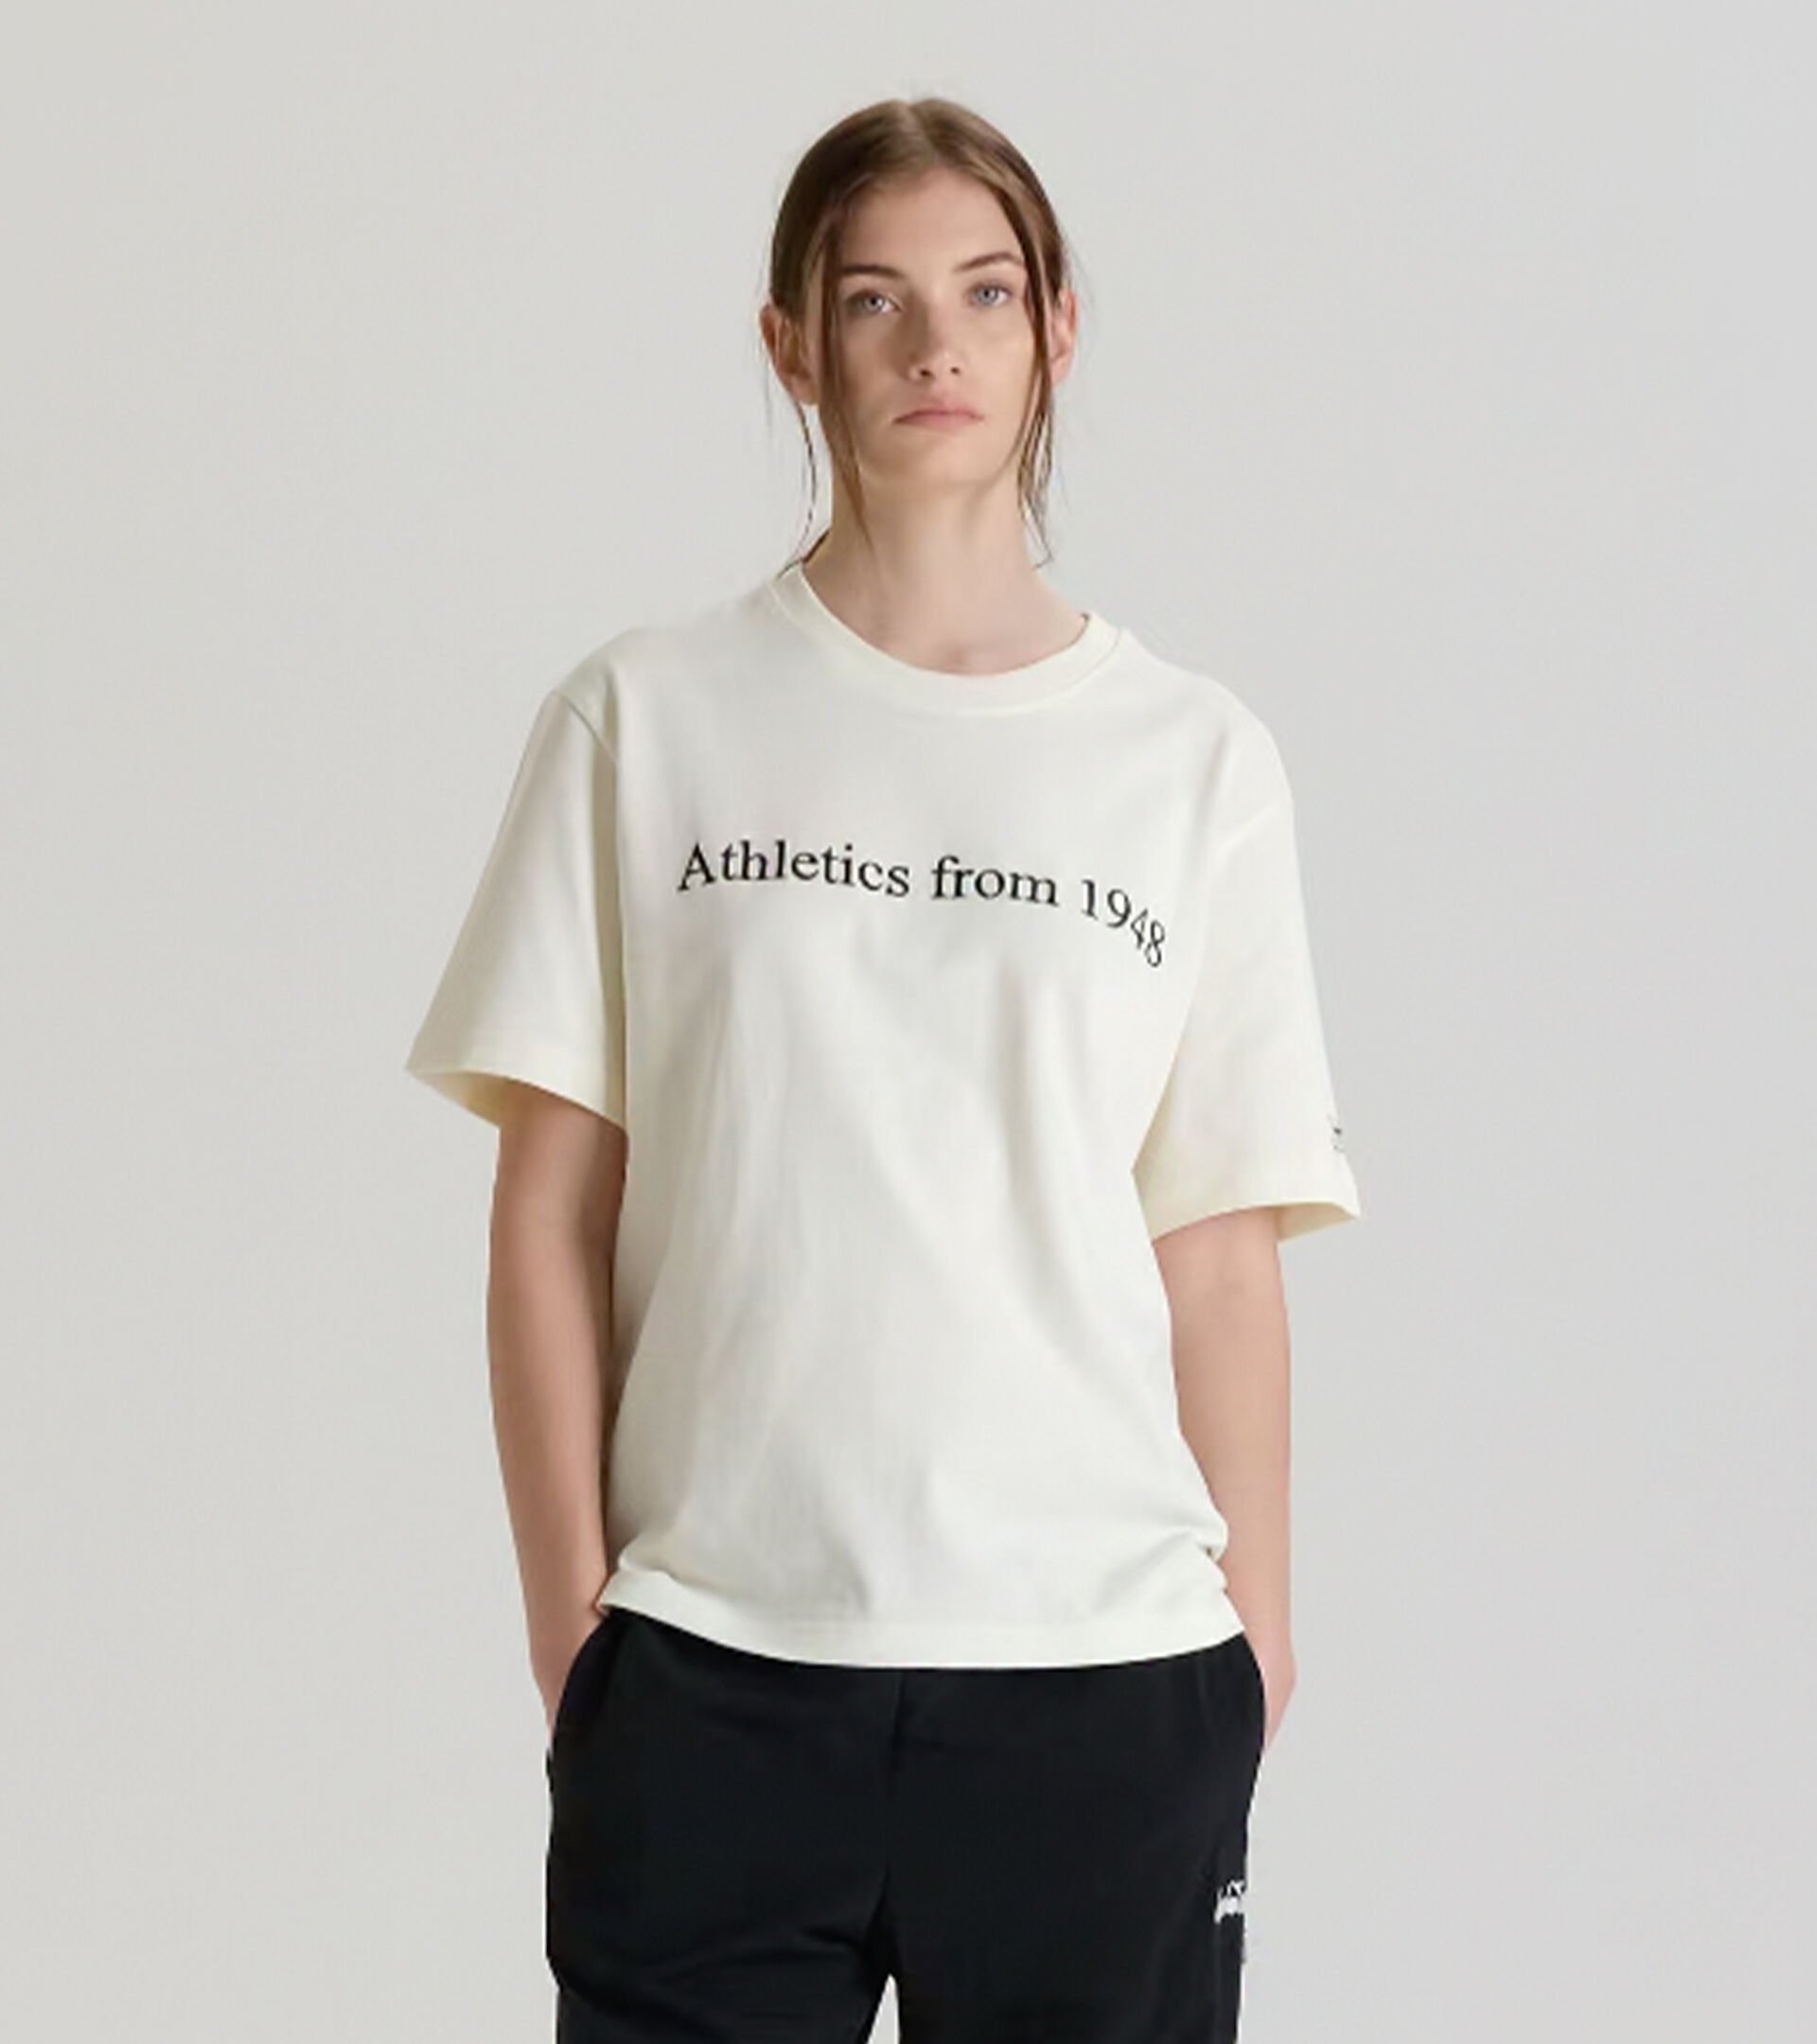 50% recycled cotton t-shirt - Made in Italy - Gender Neutral  T-SHIRT SS LEGACY WHISPER WHITE - Diadora